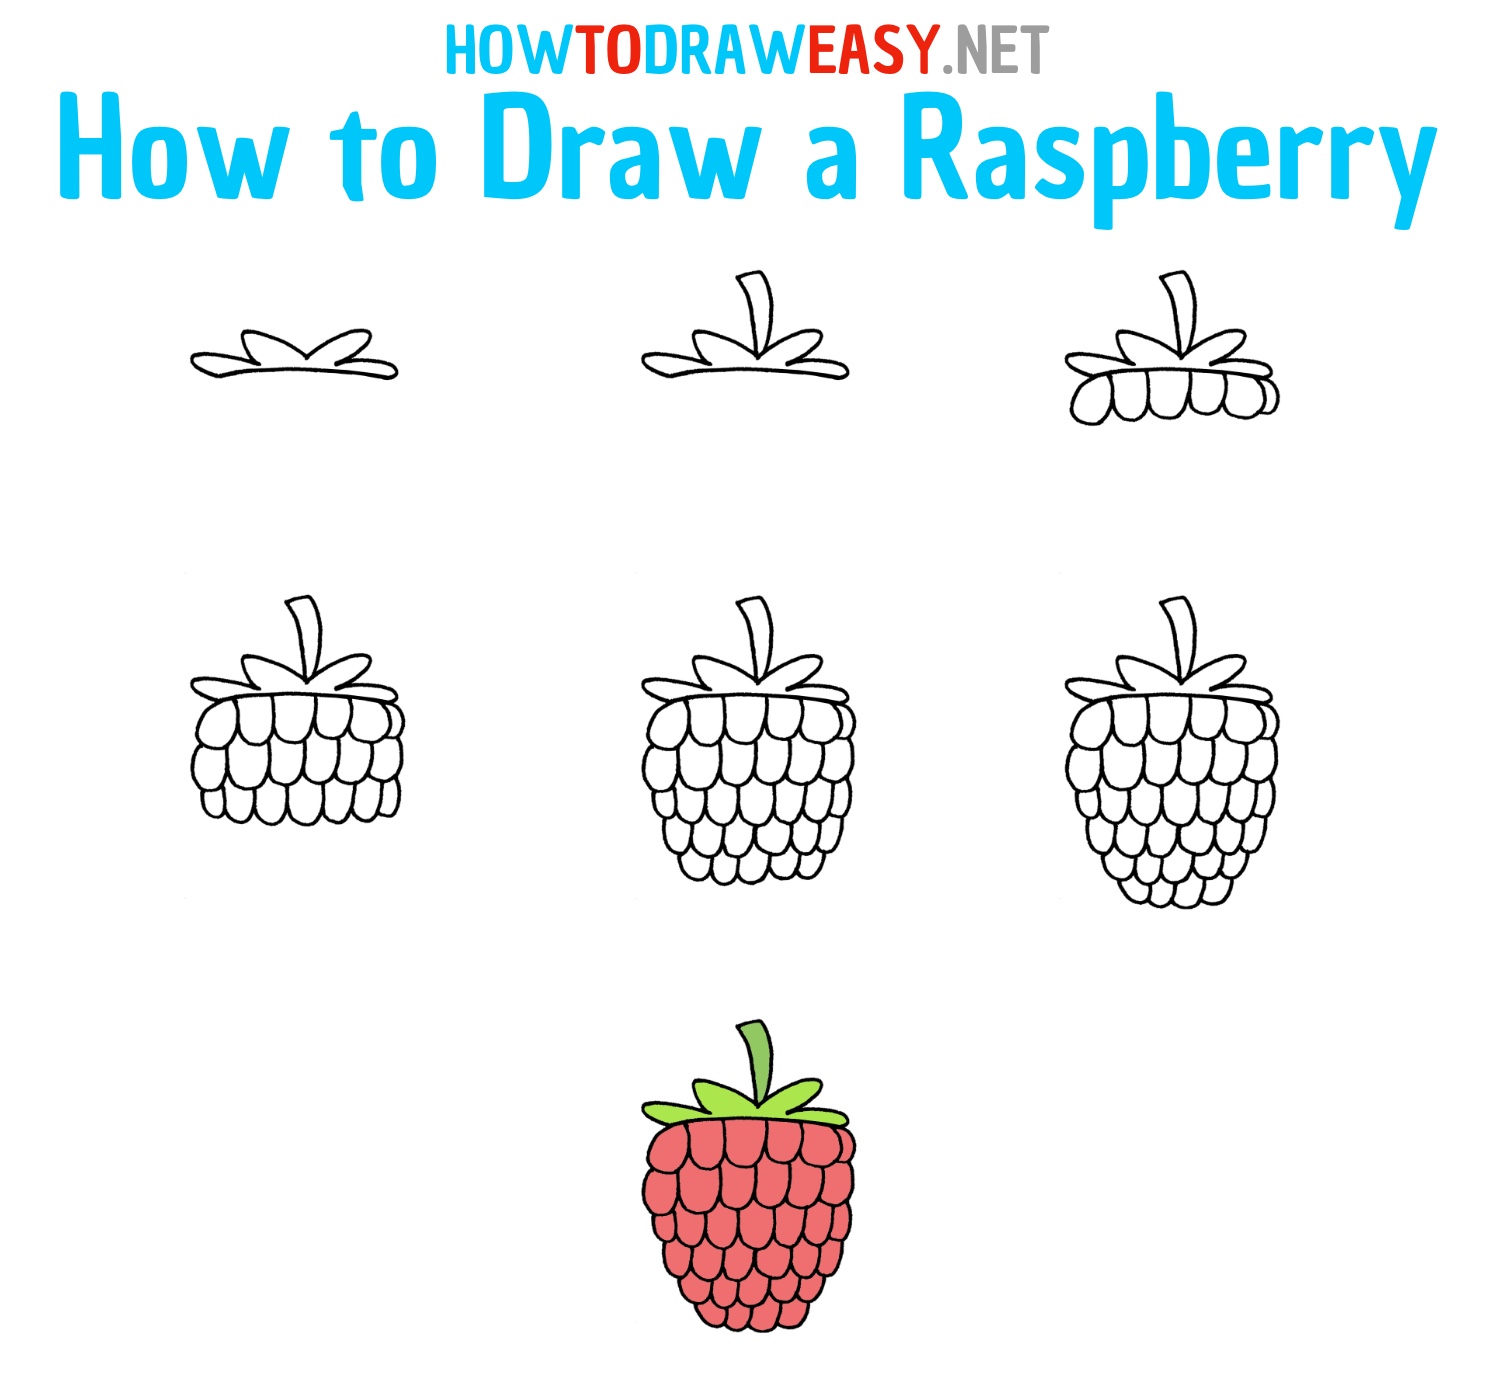 How to Draw a Raspberry Step by Step